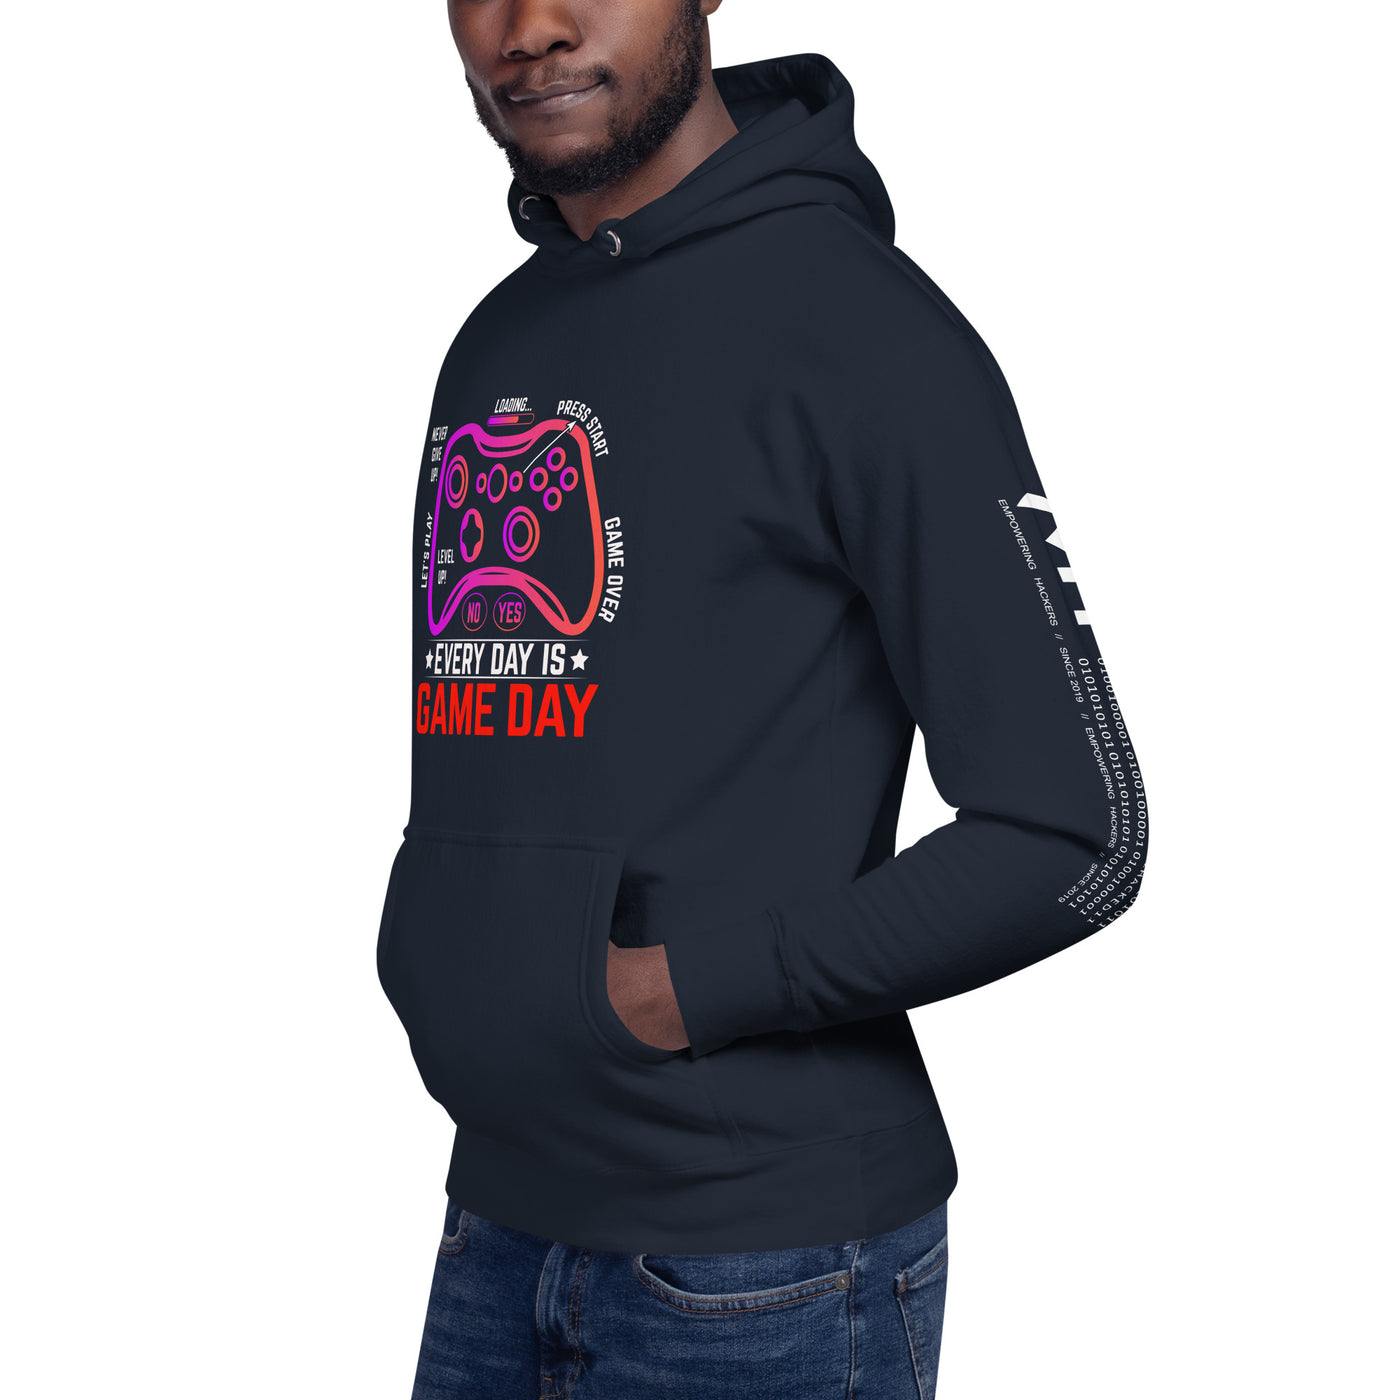 Never Give Up, everyday is Game Day - Unisex Hoodie